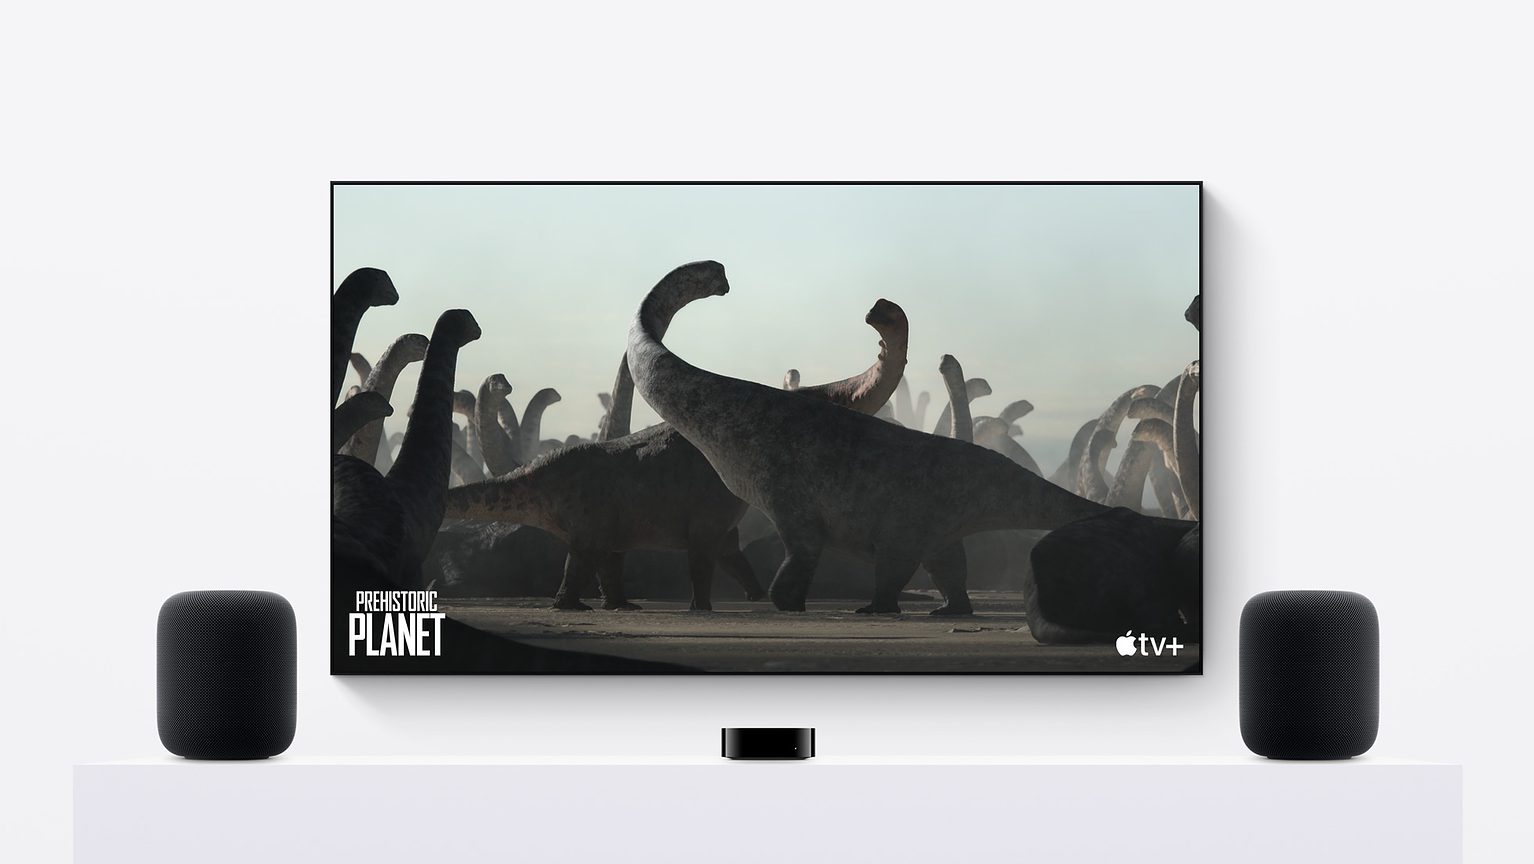 Second-generation HomePods in a stereo pair with an Apple TV 4K and a giant TV screen showing Apple TV+ dinosaur documentary 